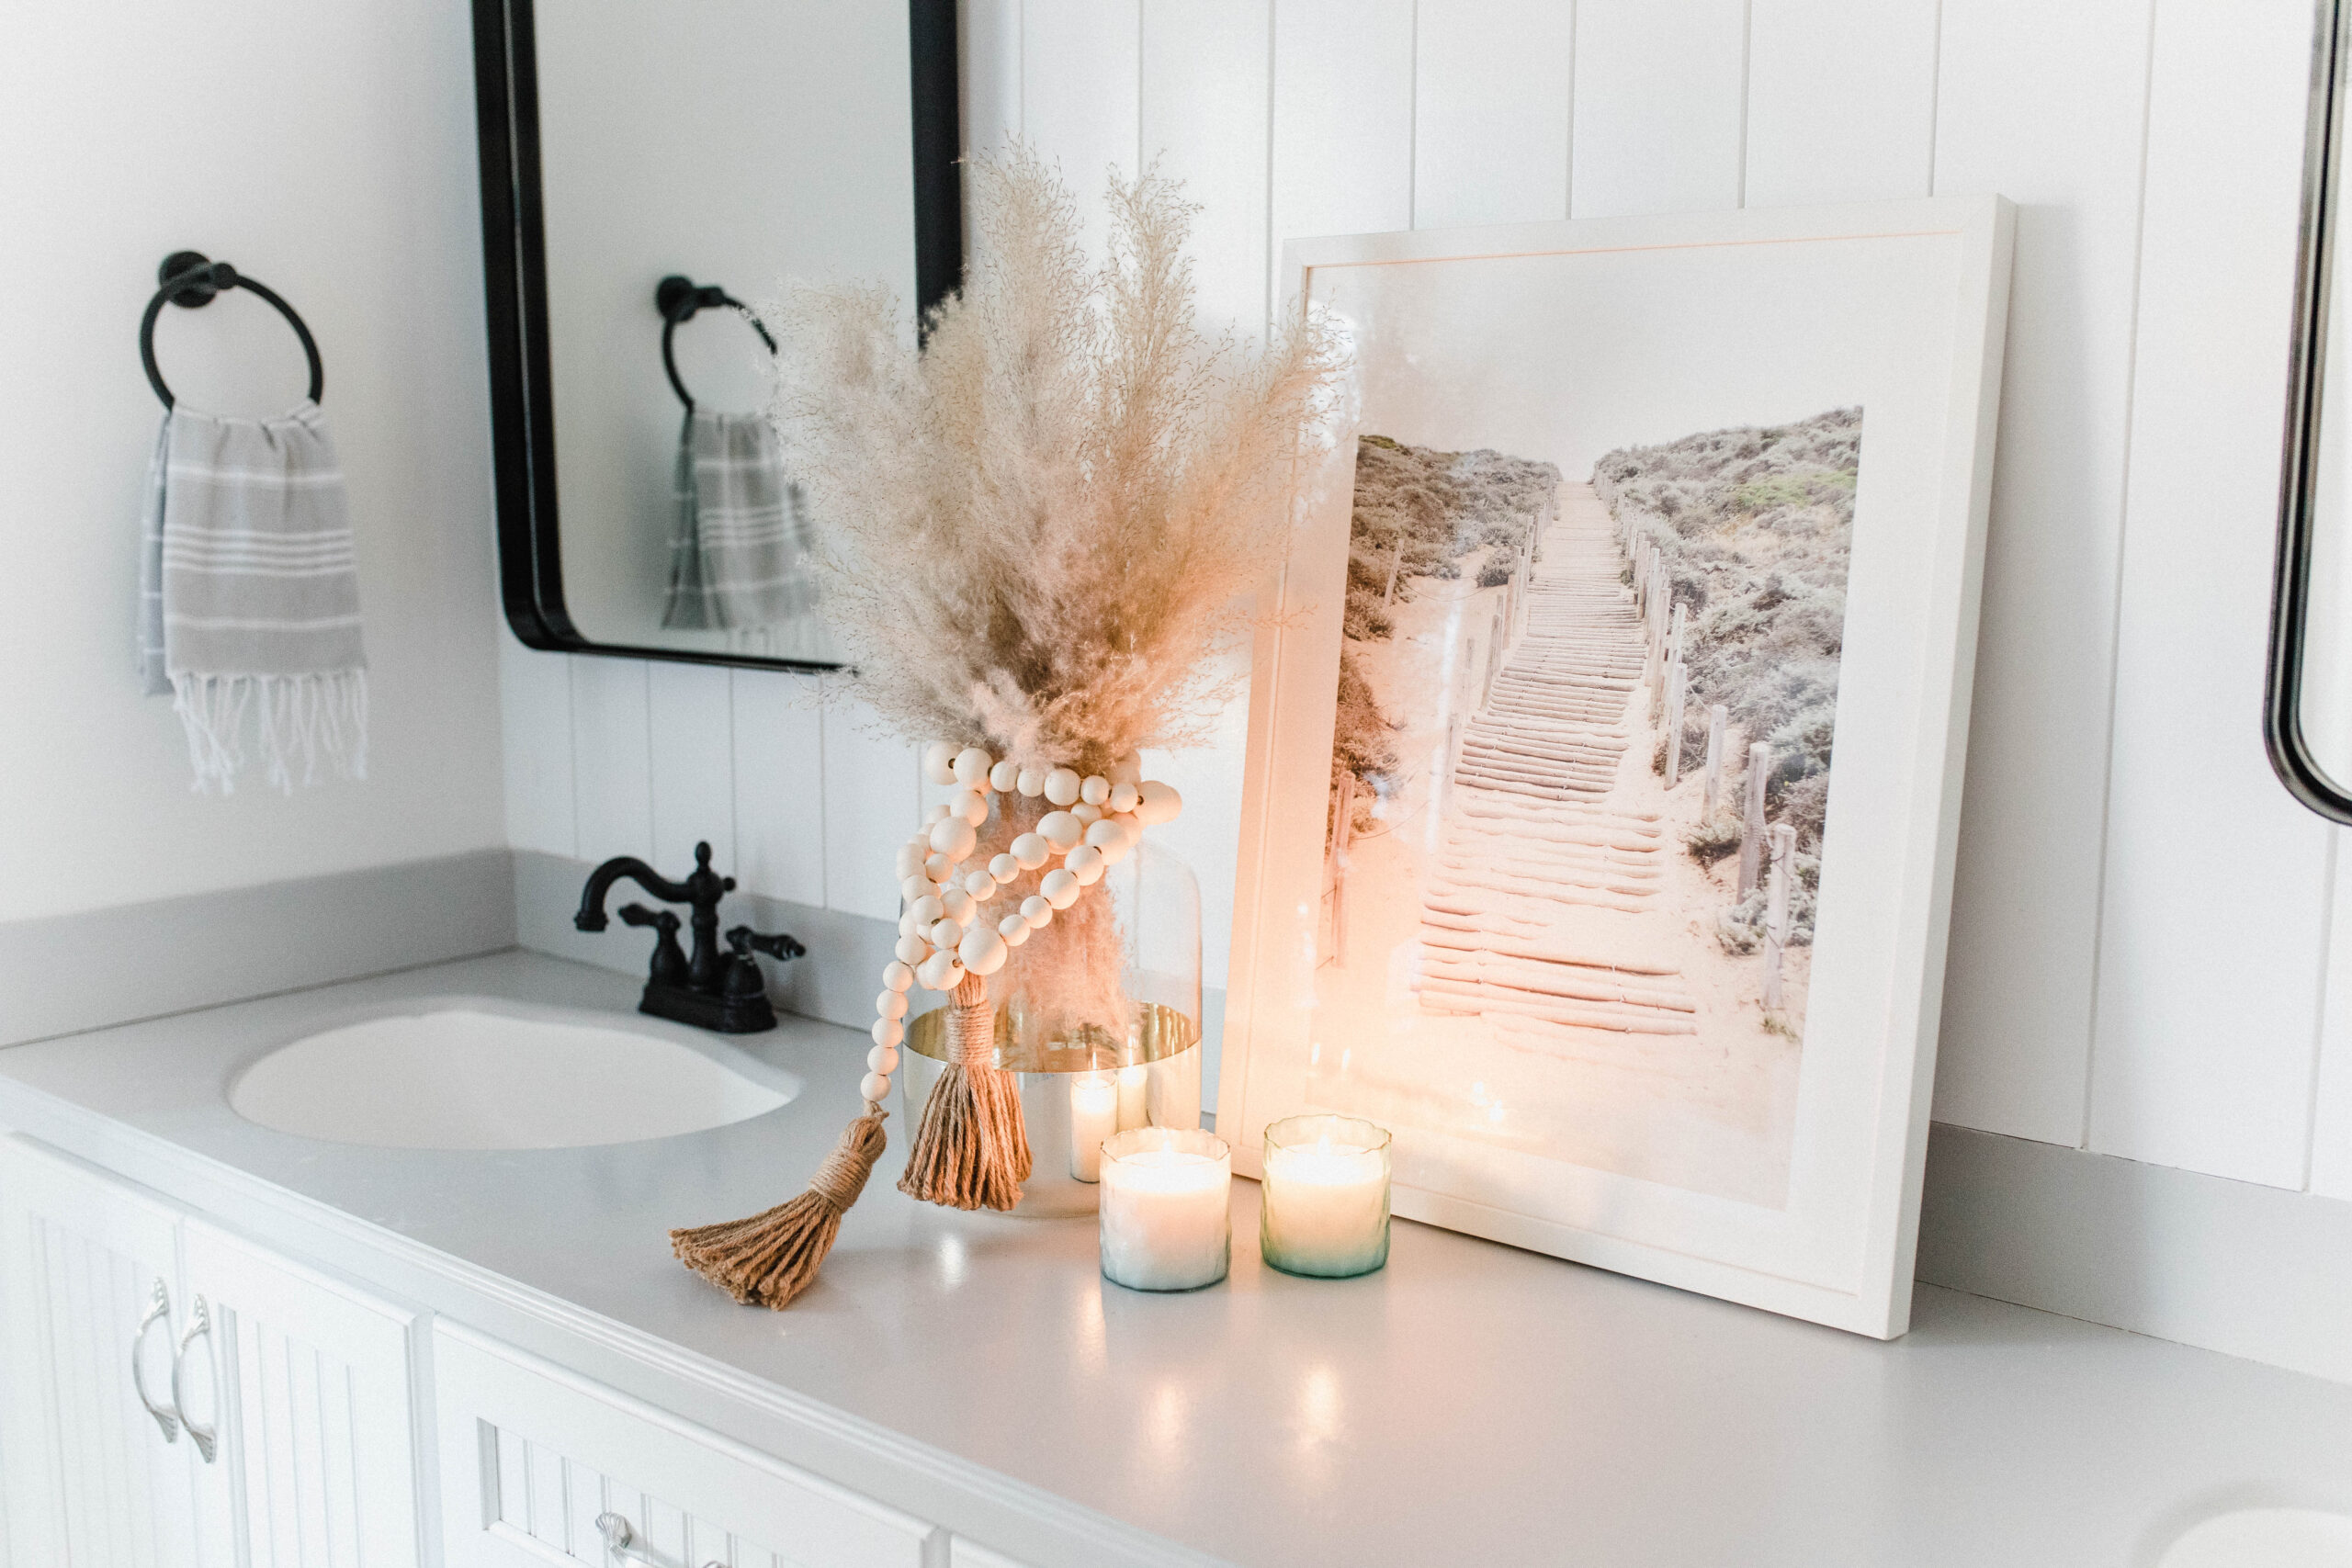 Looking for styling inspiration? Connecticut life and style blogger Lauren McBride shares three ways to style a vase from her QVC line.